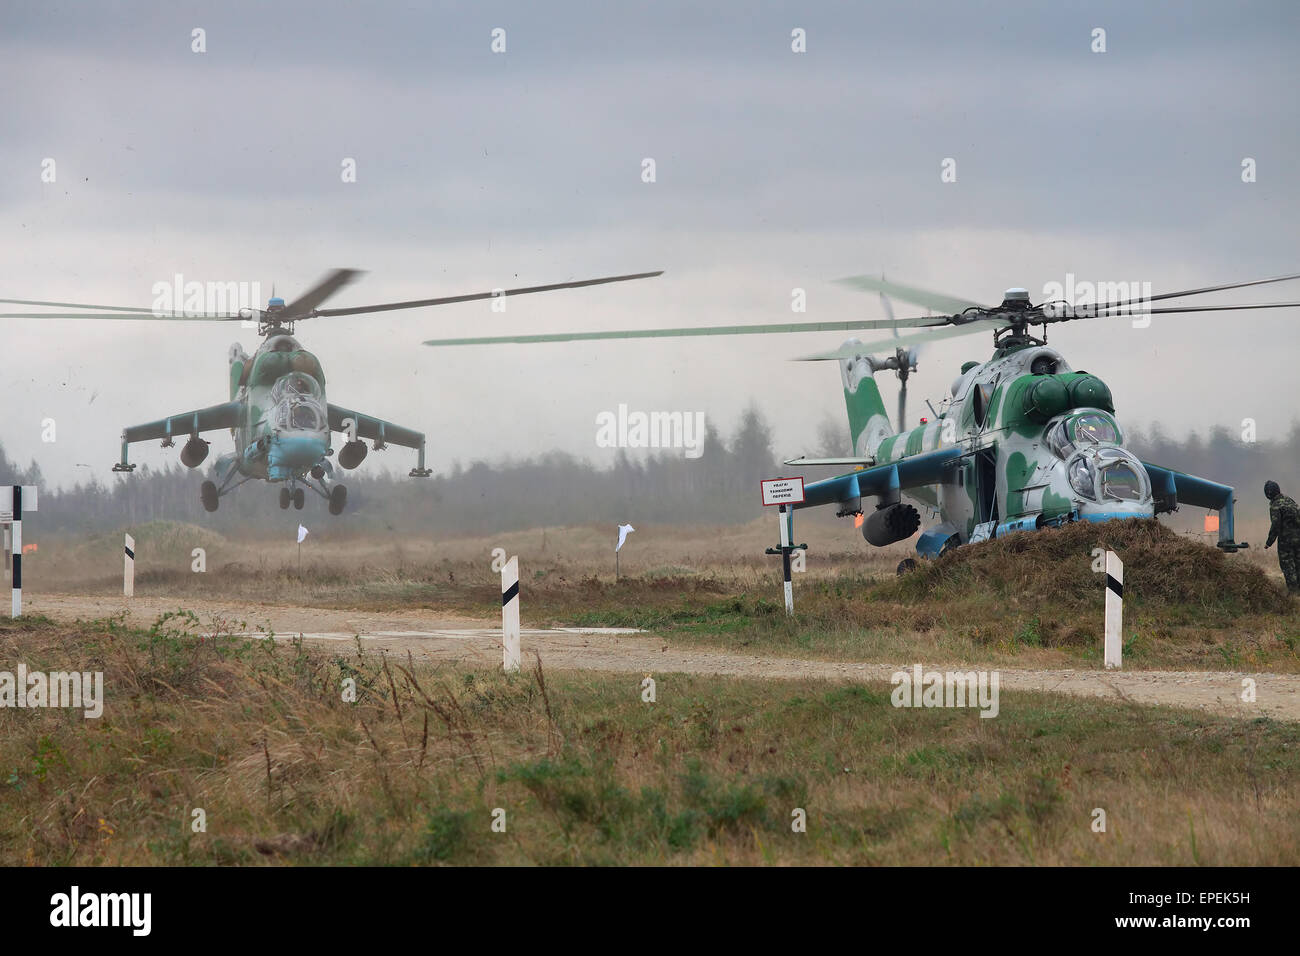 Zhitomir, Ukraine - September 29, 2010: Ukrainian Army Mi-24's Attack Helicopters during military training Stock Photo